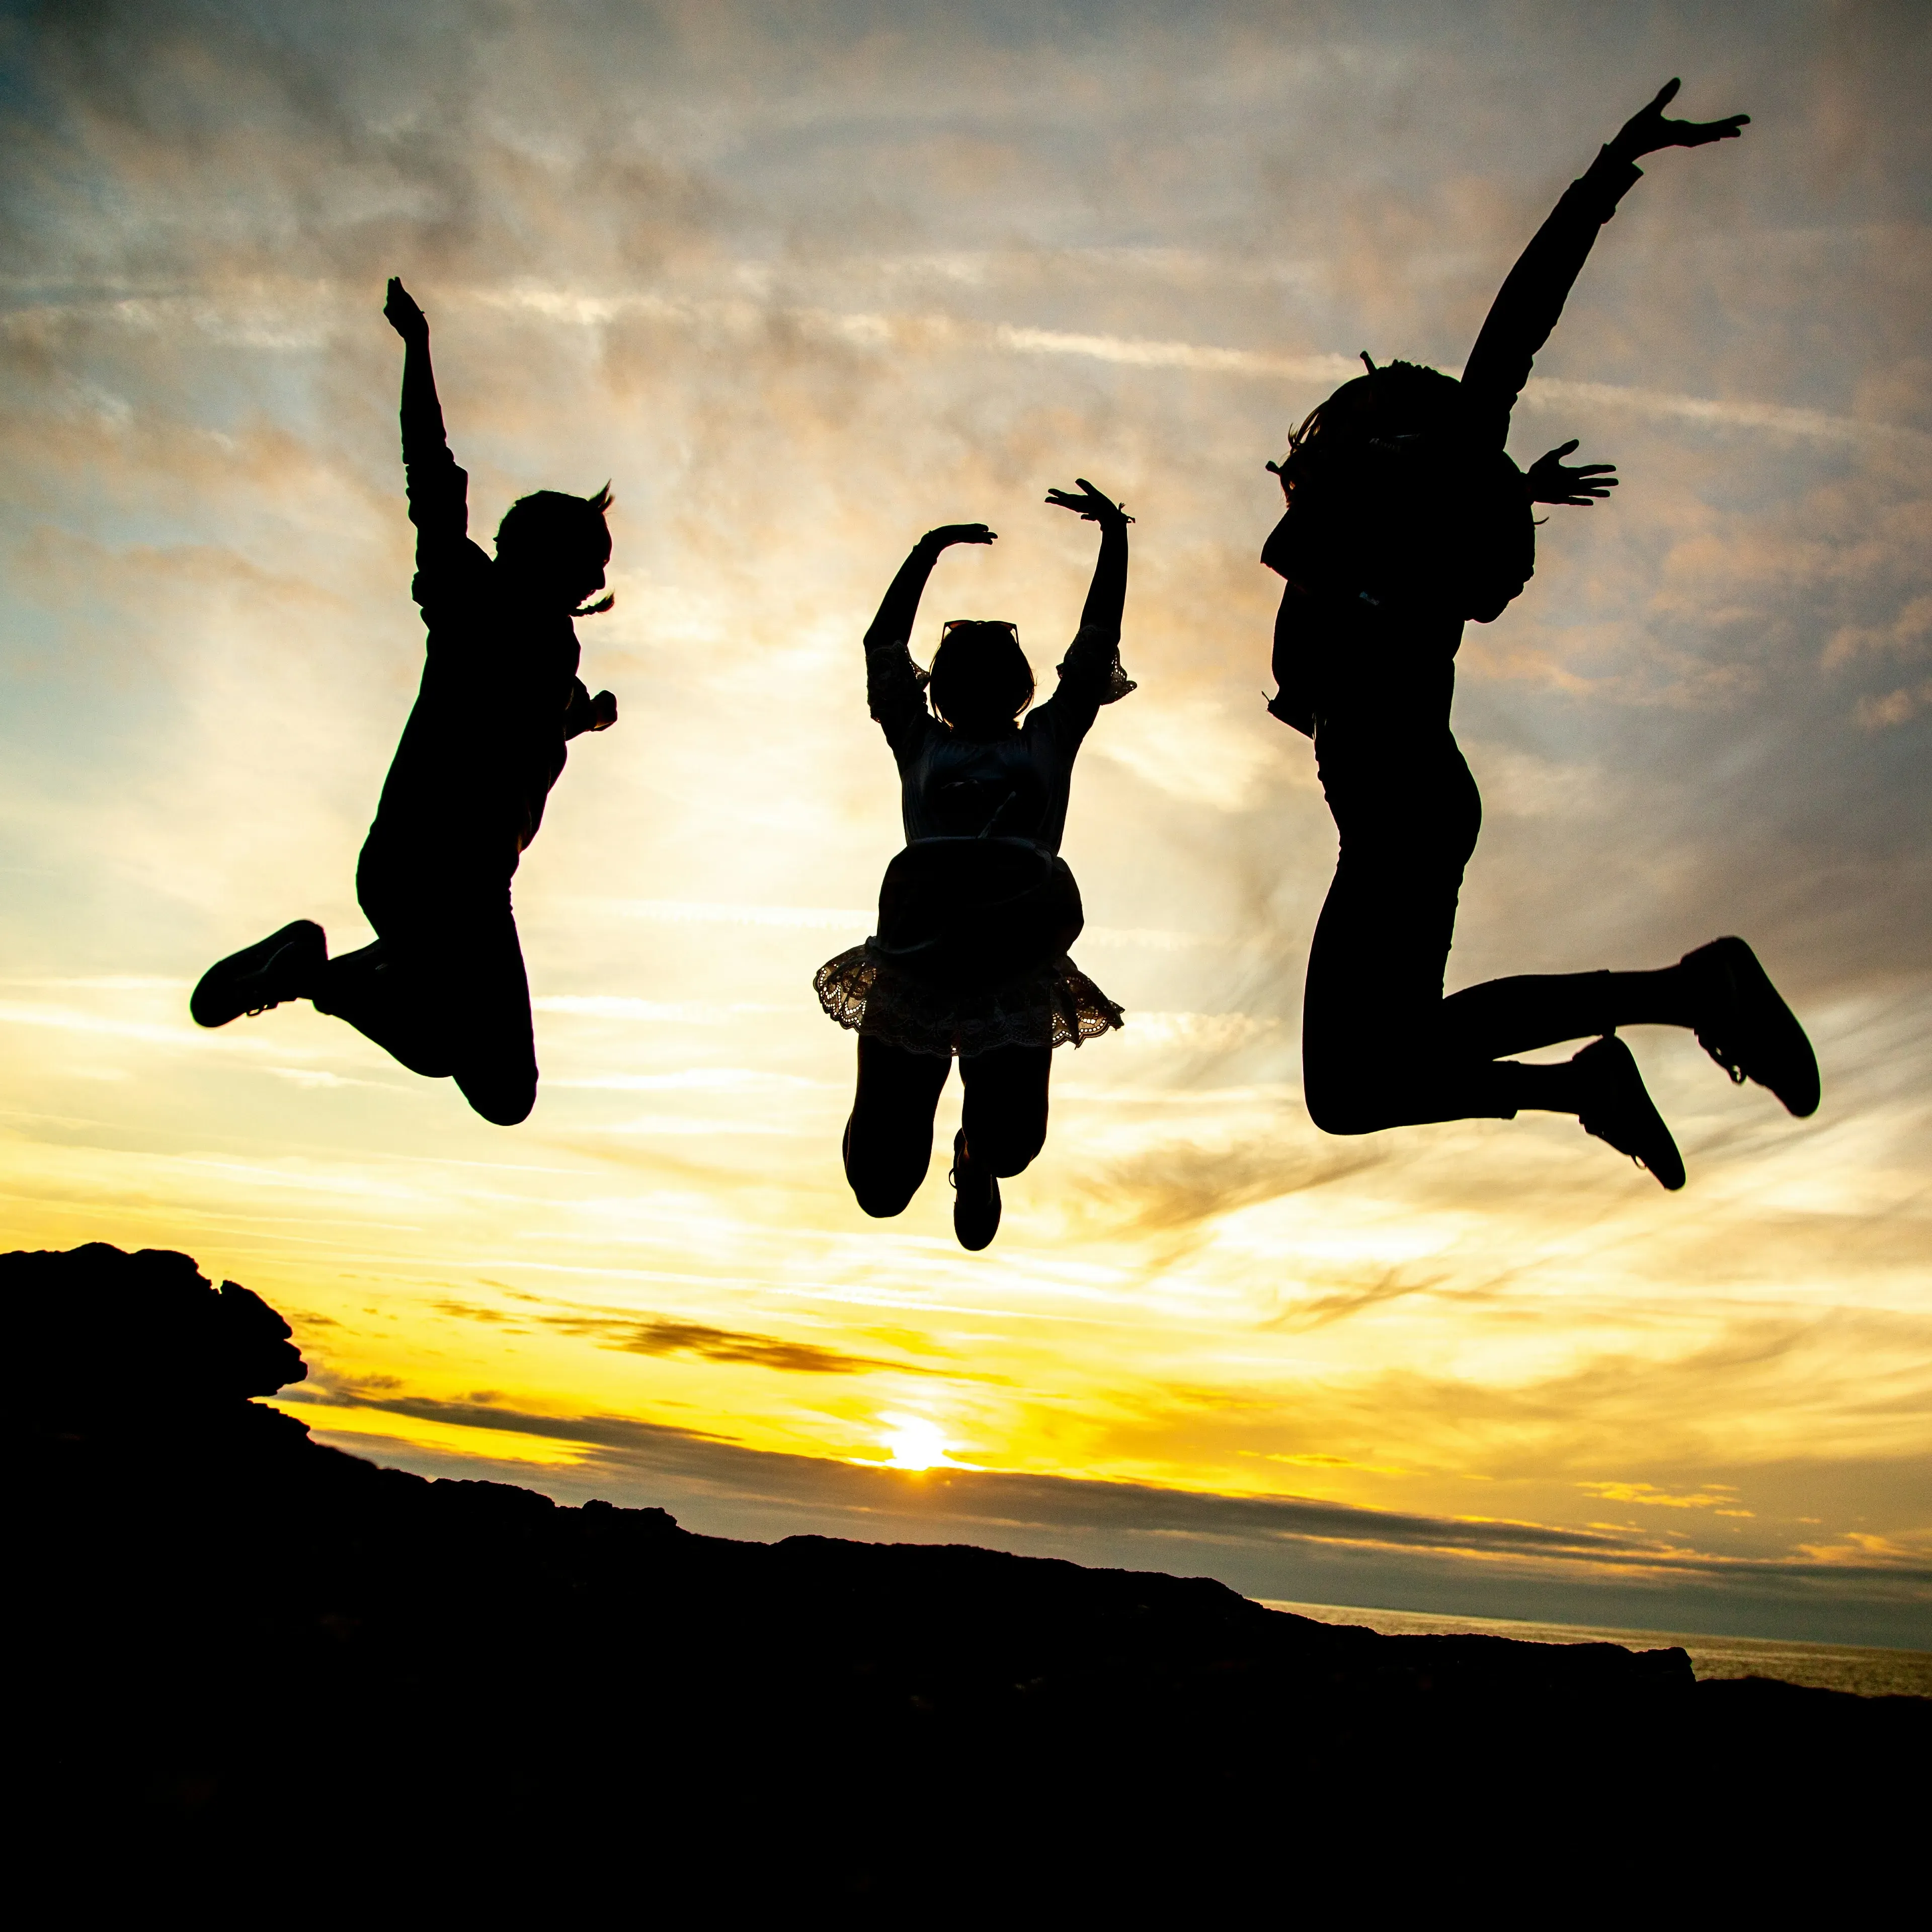 3 people silhouettes jumping freely with golden sky background